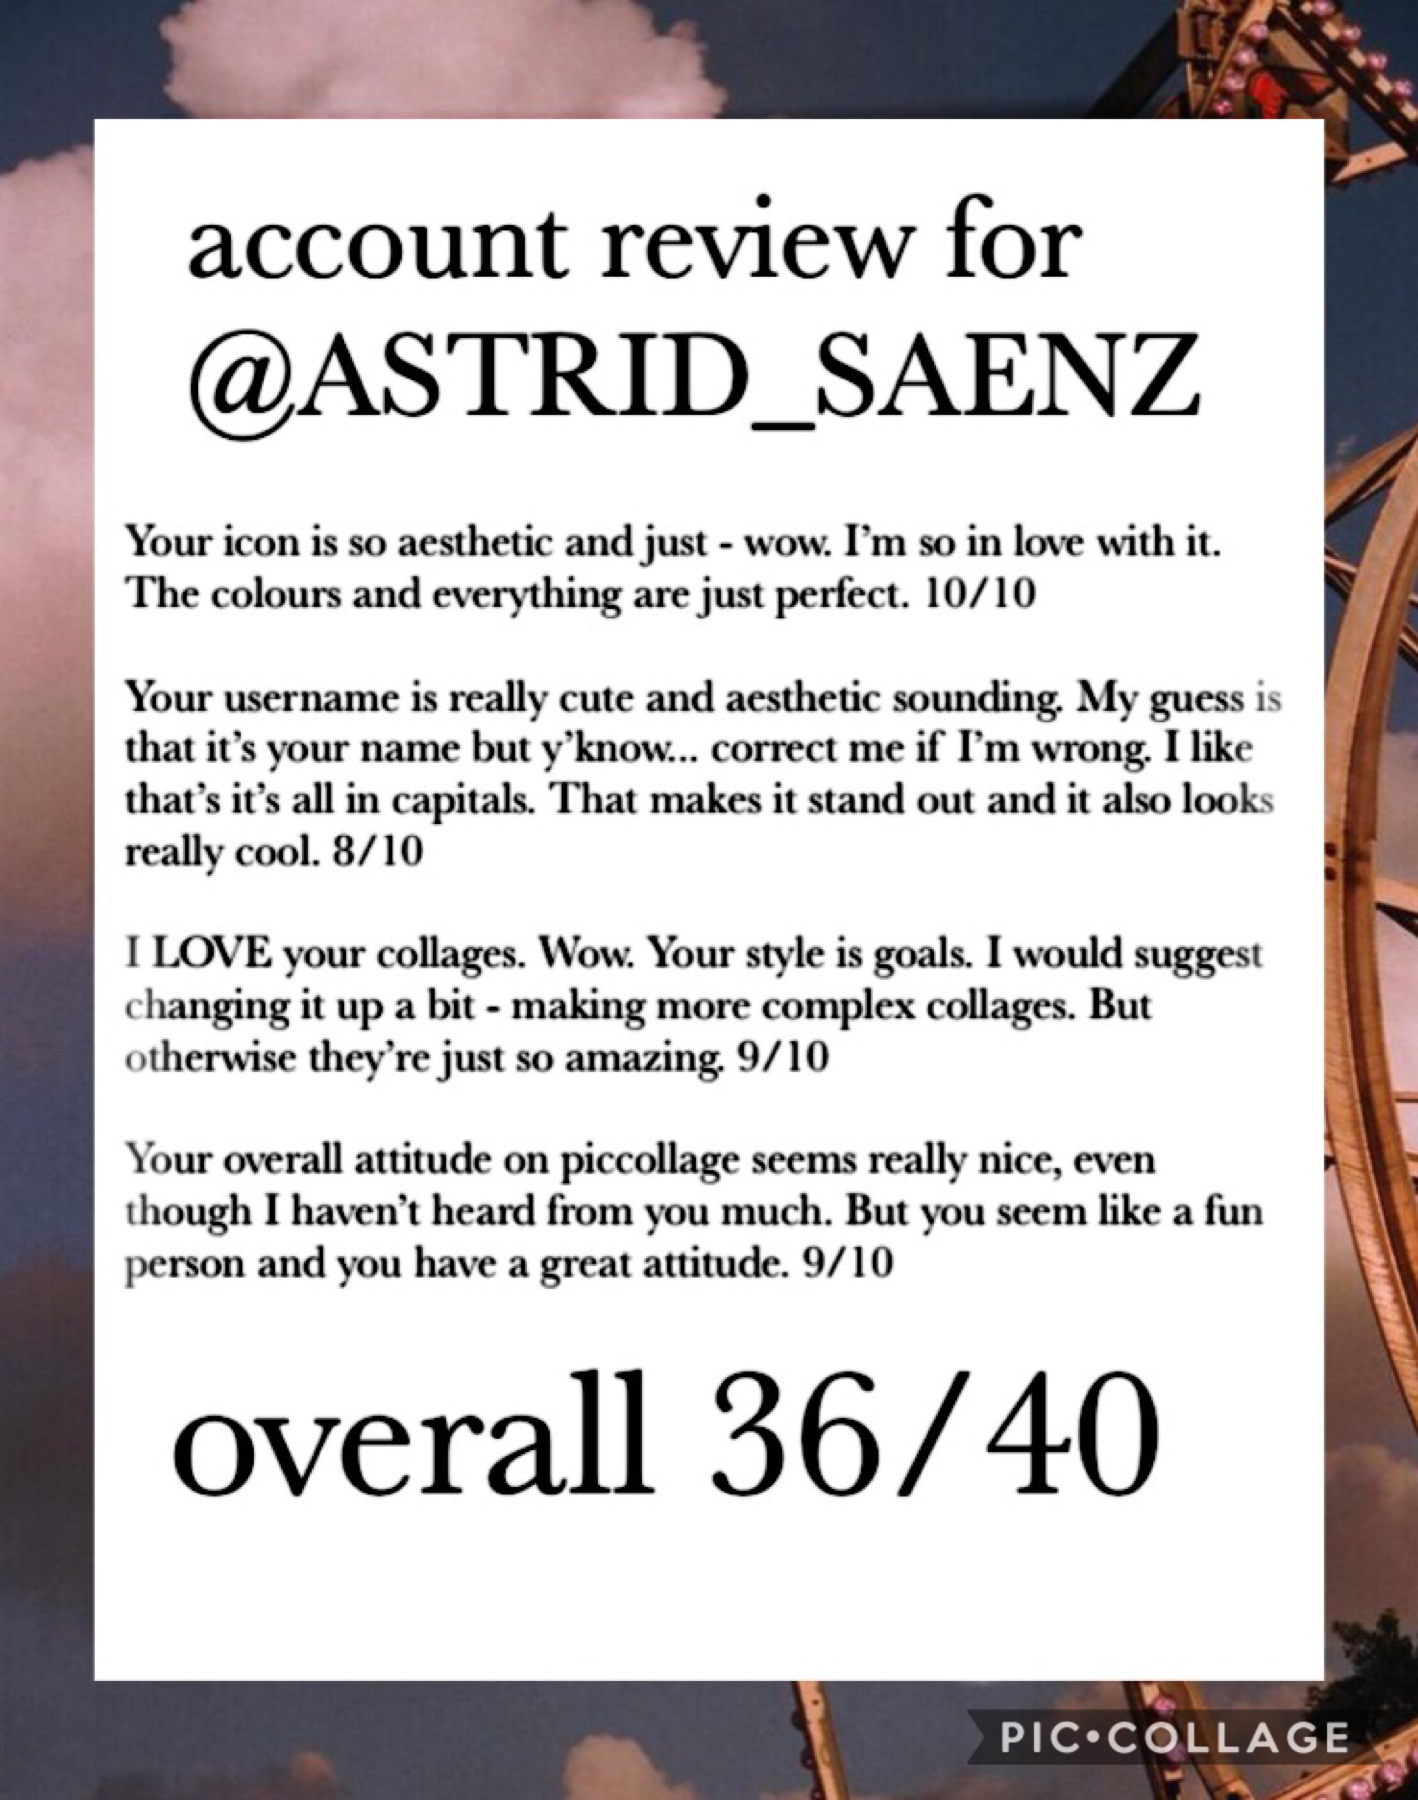 Account review for @ASTRID_SAENZ